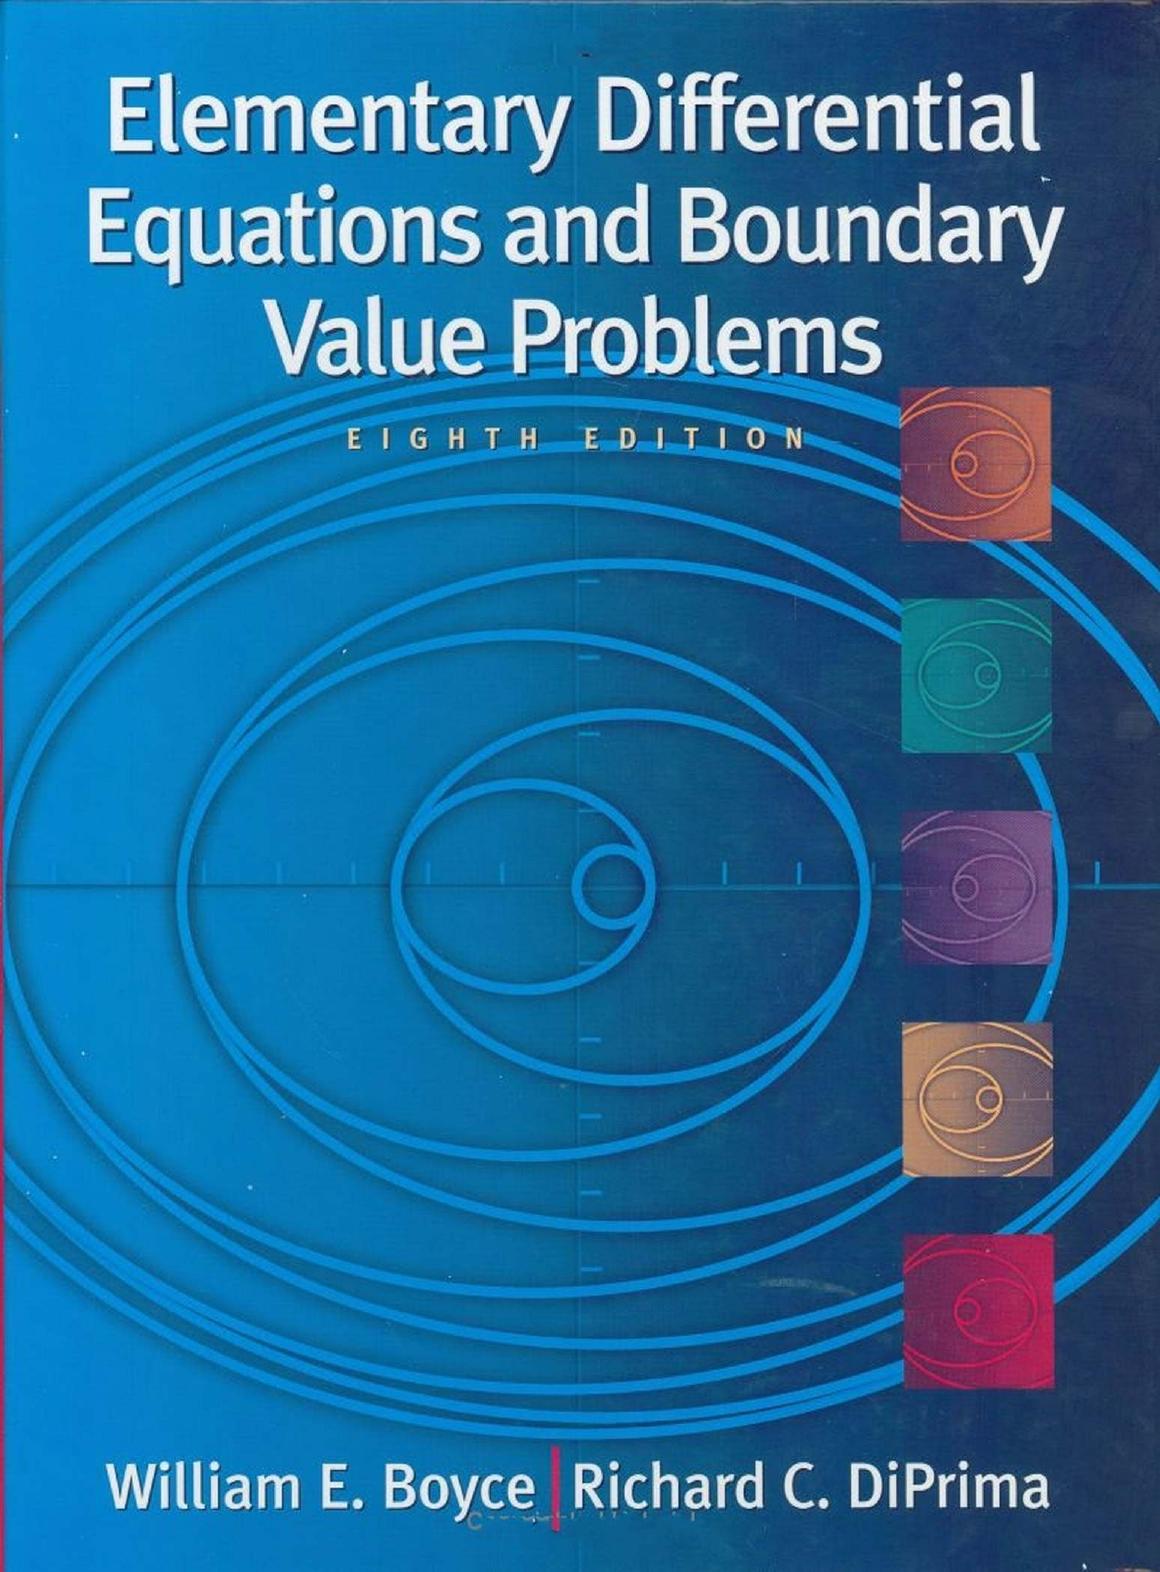 Elementary Differential Equations and Boundary Value Problems , 8th Edition